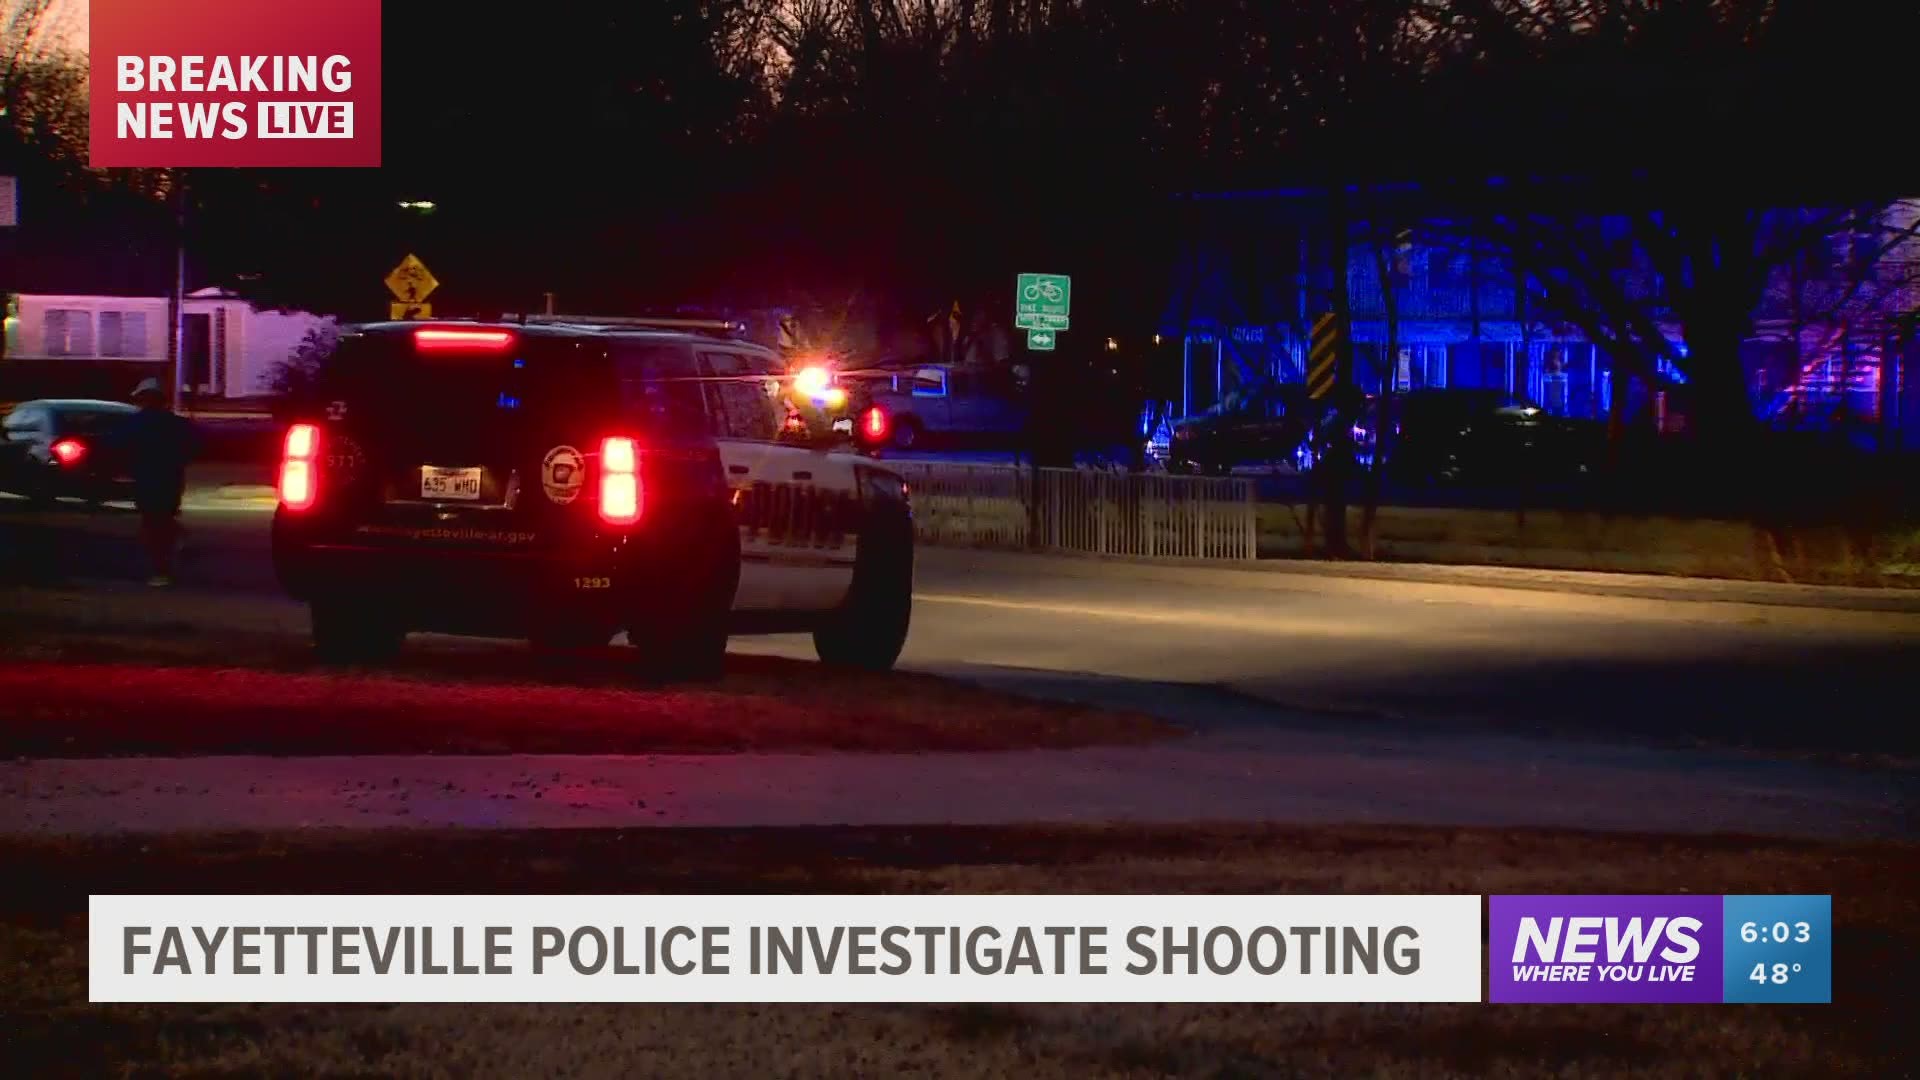 Fayetteville Police investigate shooting